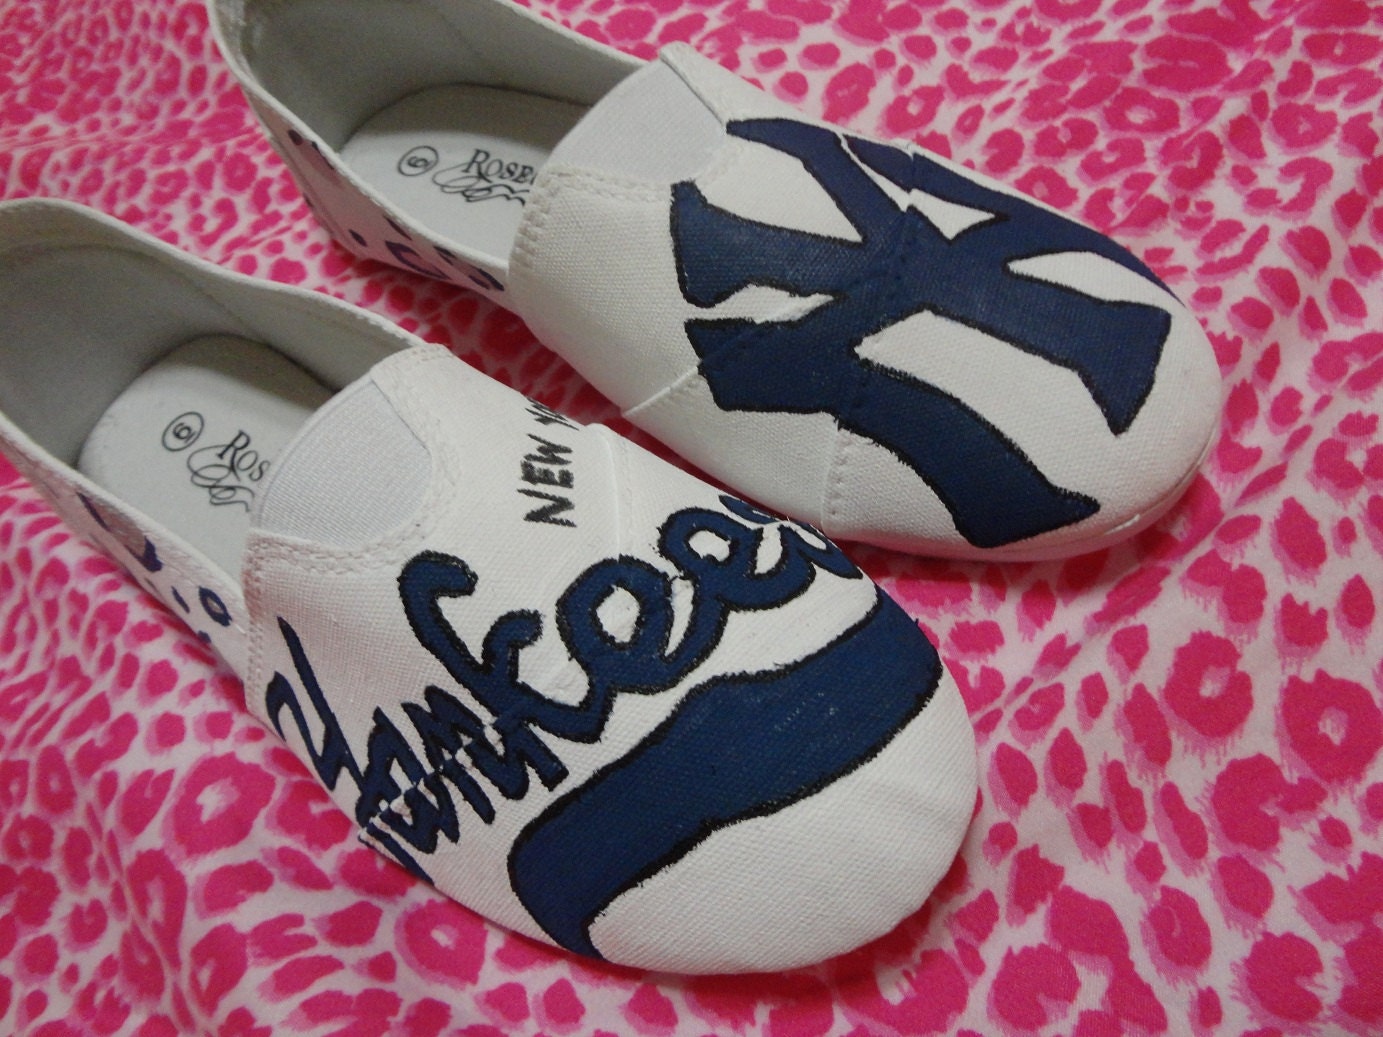 Handpainted MLB NY New York Yankees shoes Any size Like Toms